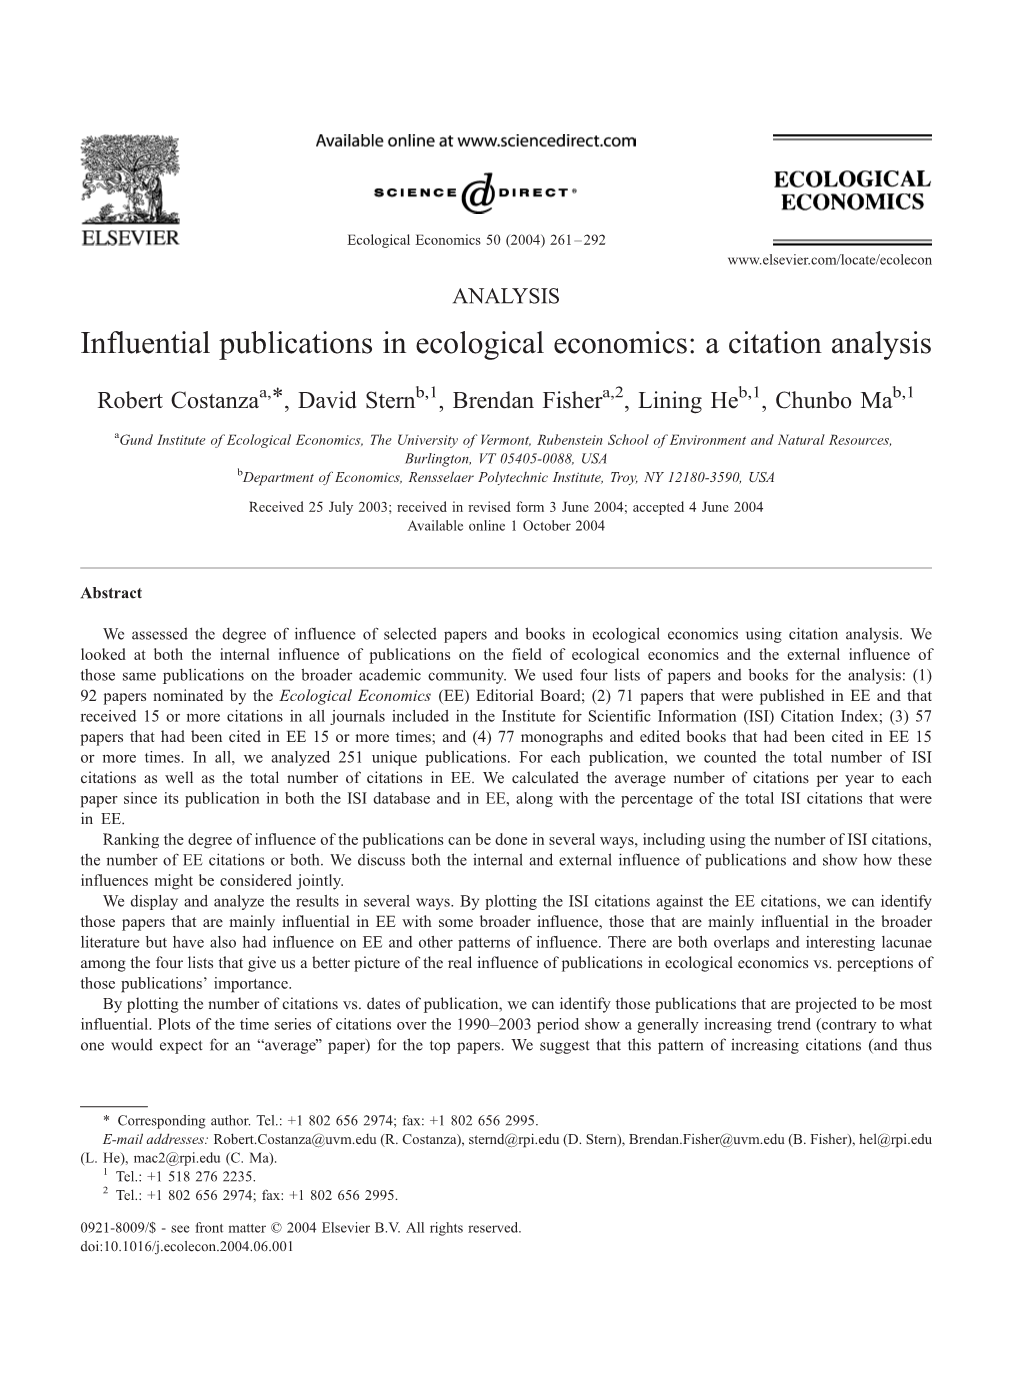 Influential Publications in Ecological Economics: a Citation Analysis